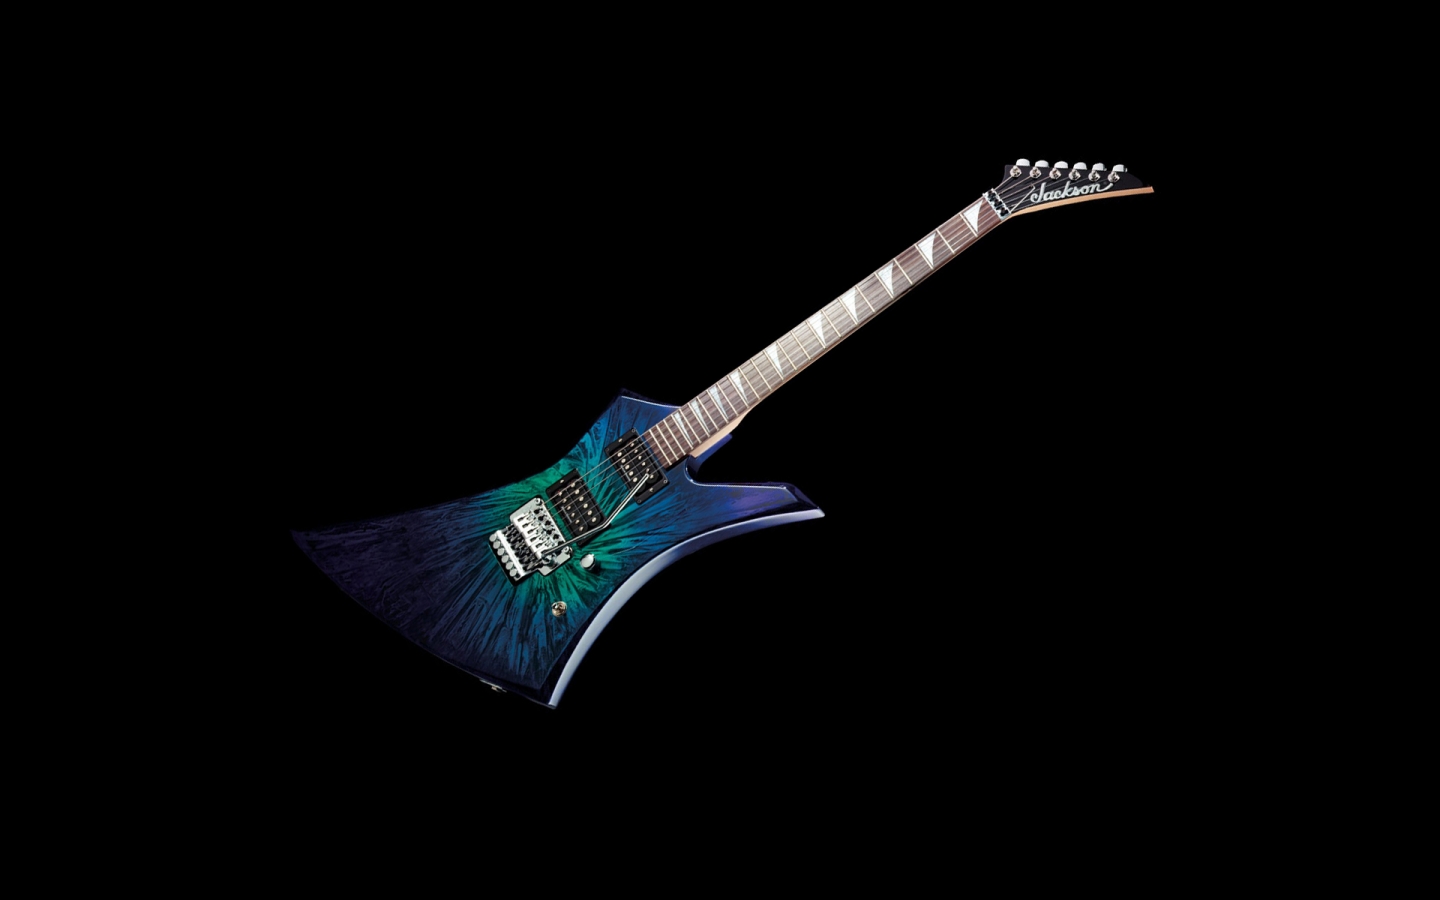 Colourful Guitar for 1440 x 900 widescreen resolution